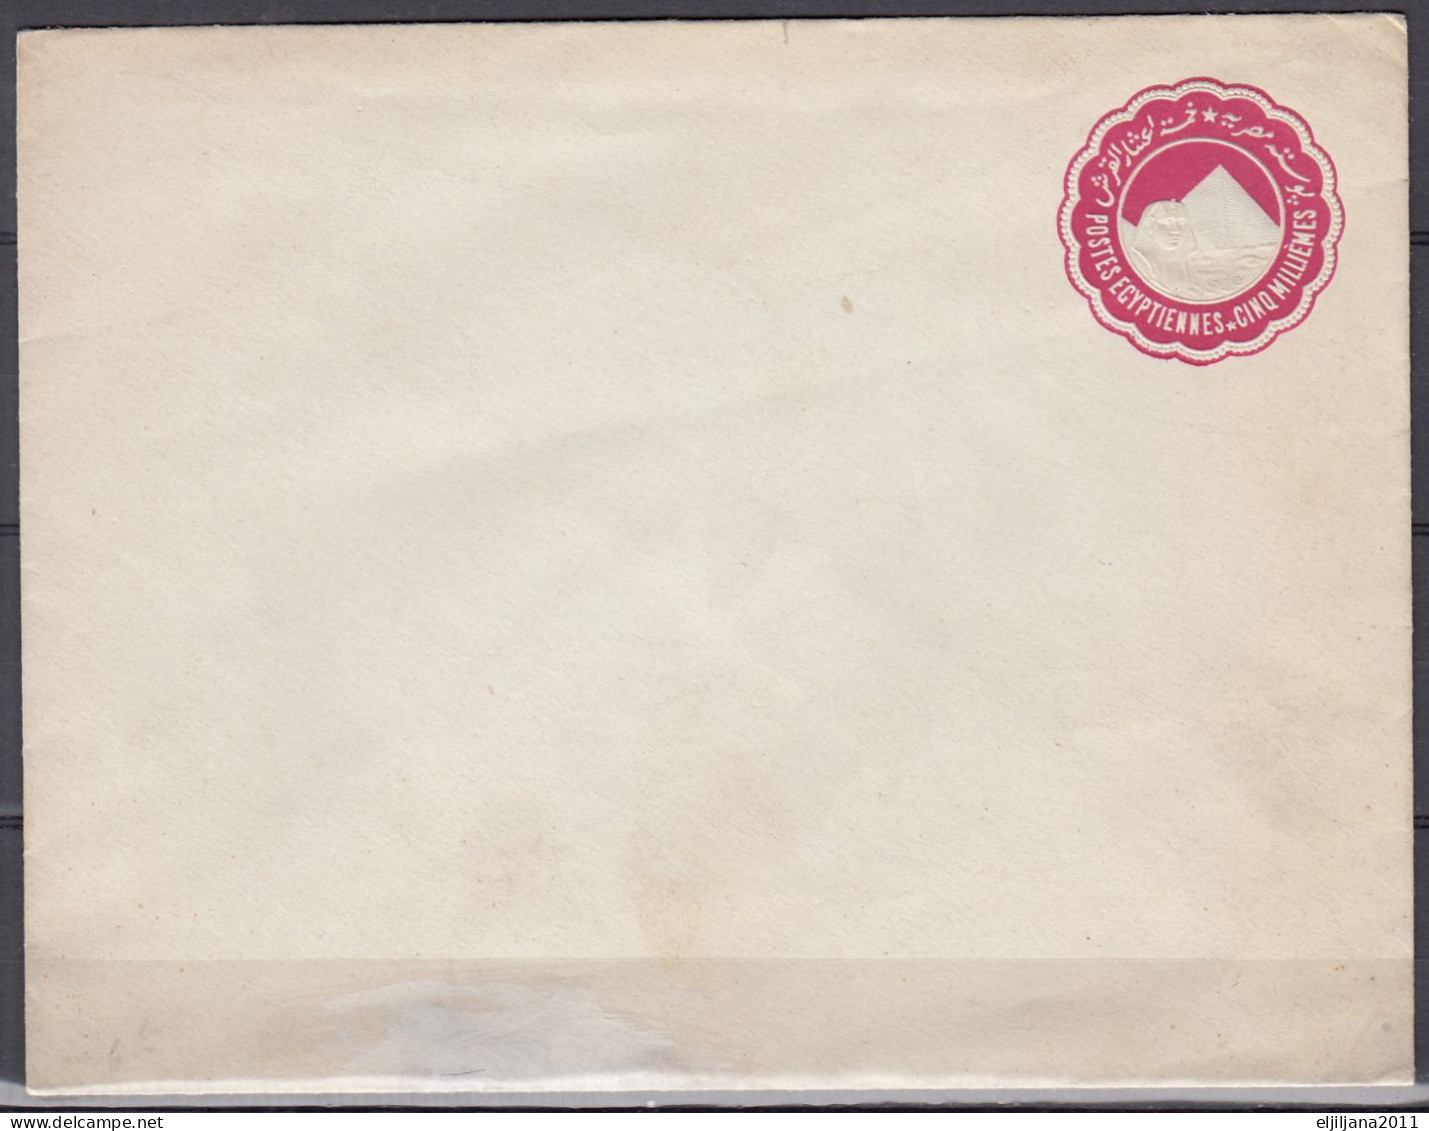 ⁕ Egypt 1888 - 1892 Postal Stationery Cover 5 Milles Millièmes - Egyptiennes Cinq Milliemes ⁕ Closed - Glued - 1866-1914 Khedivate Of Egypt